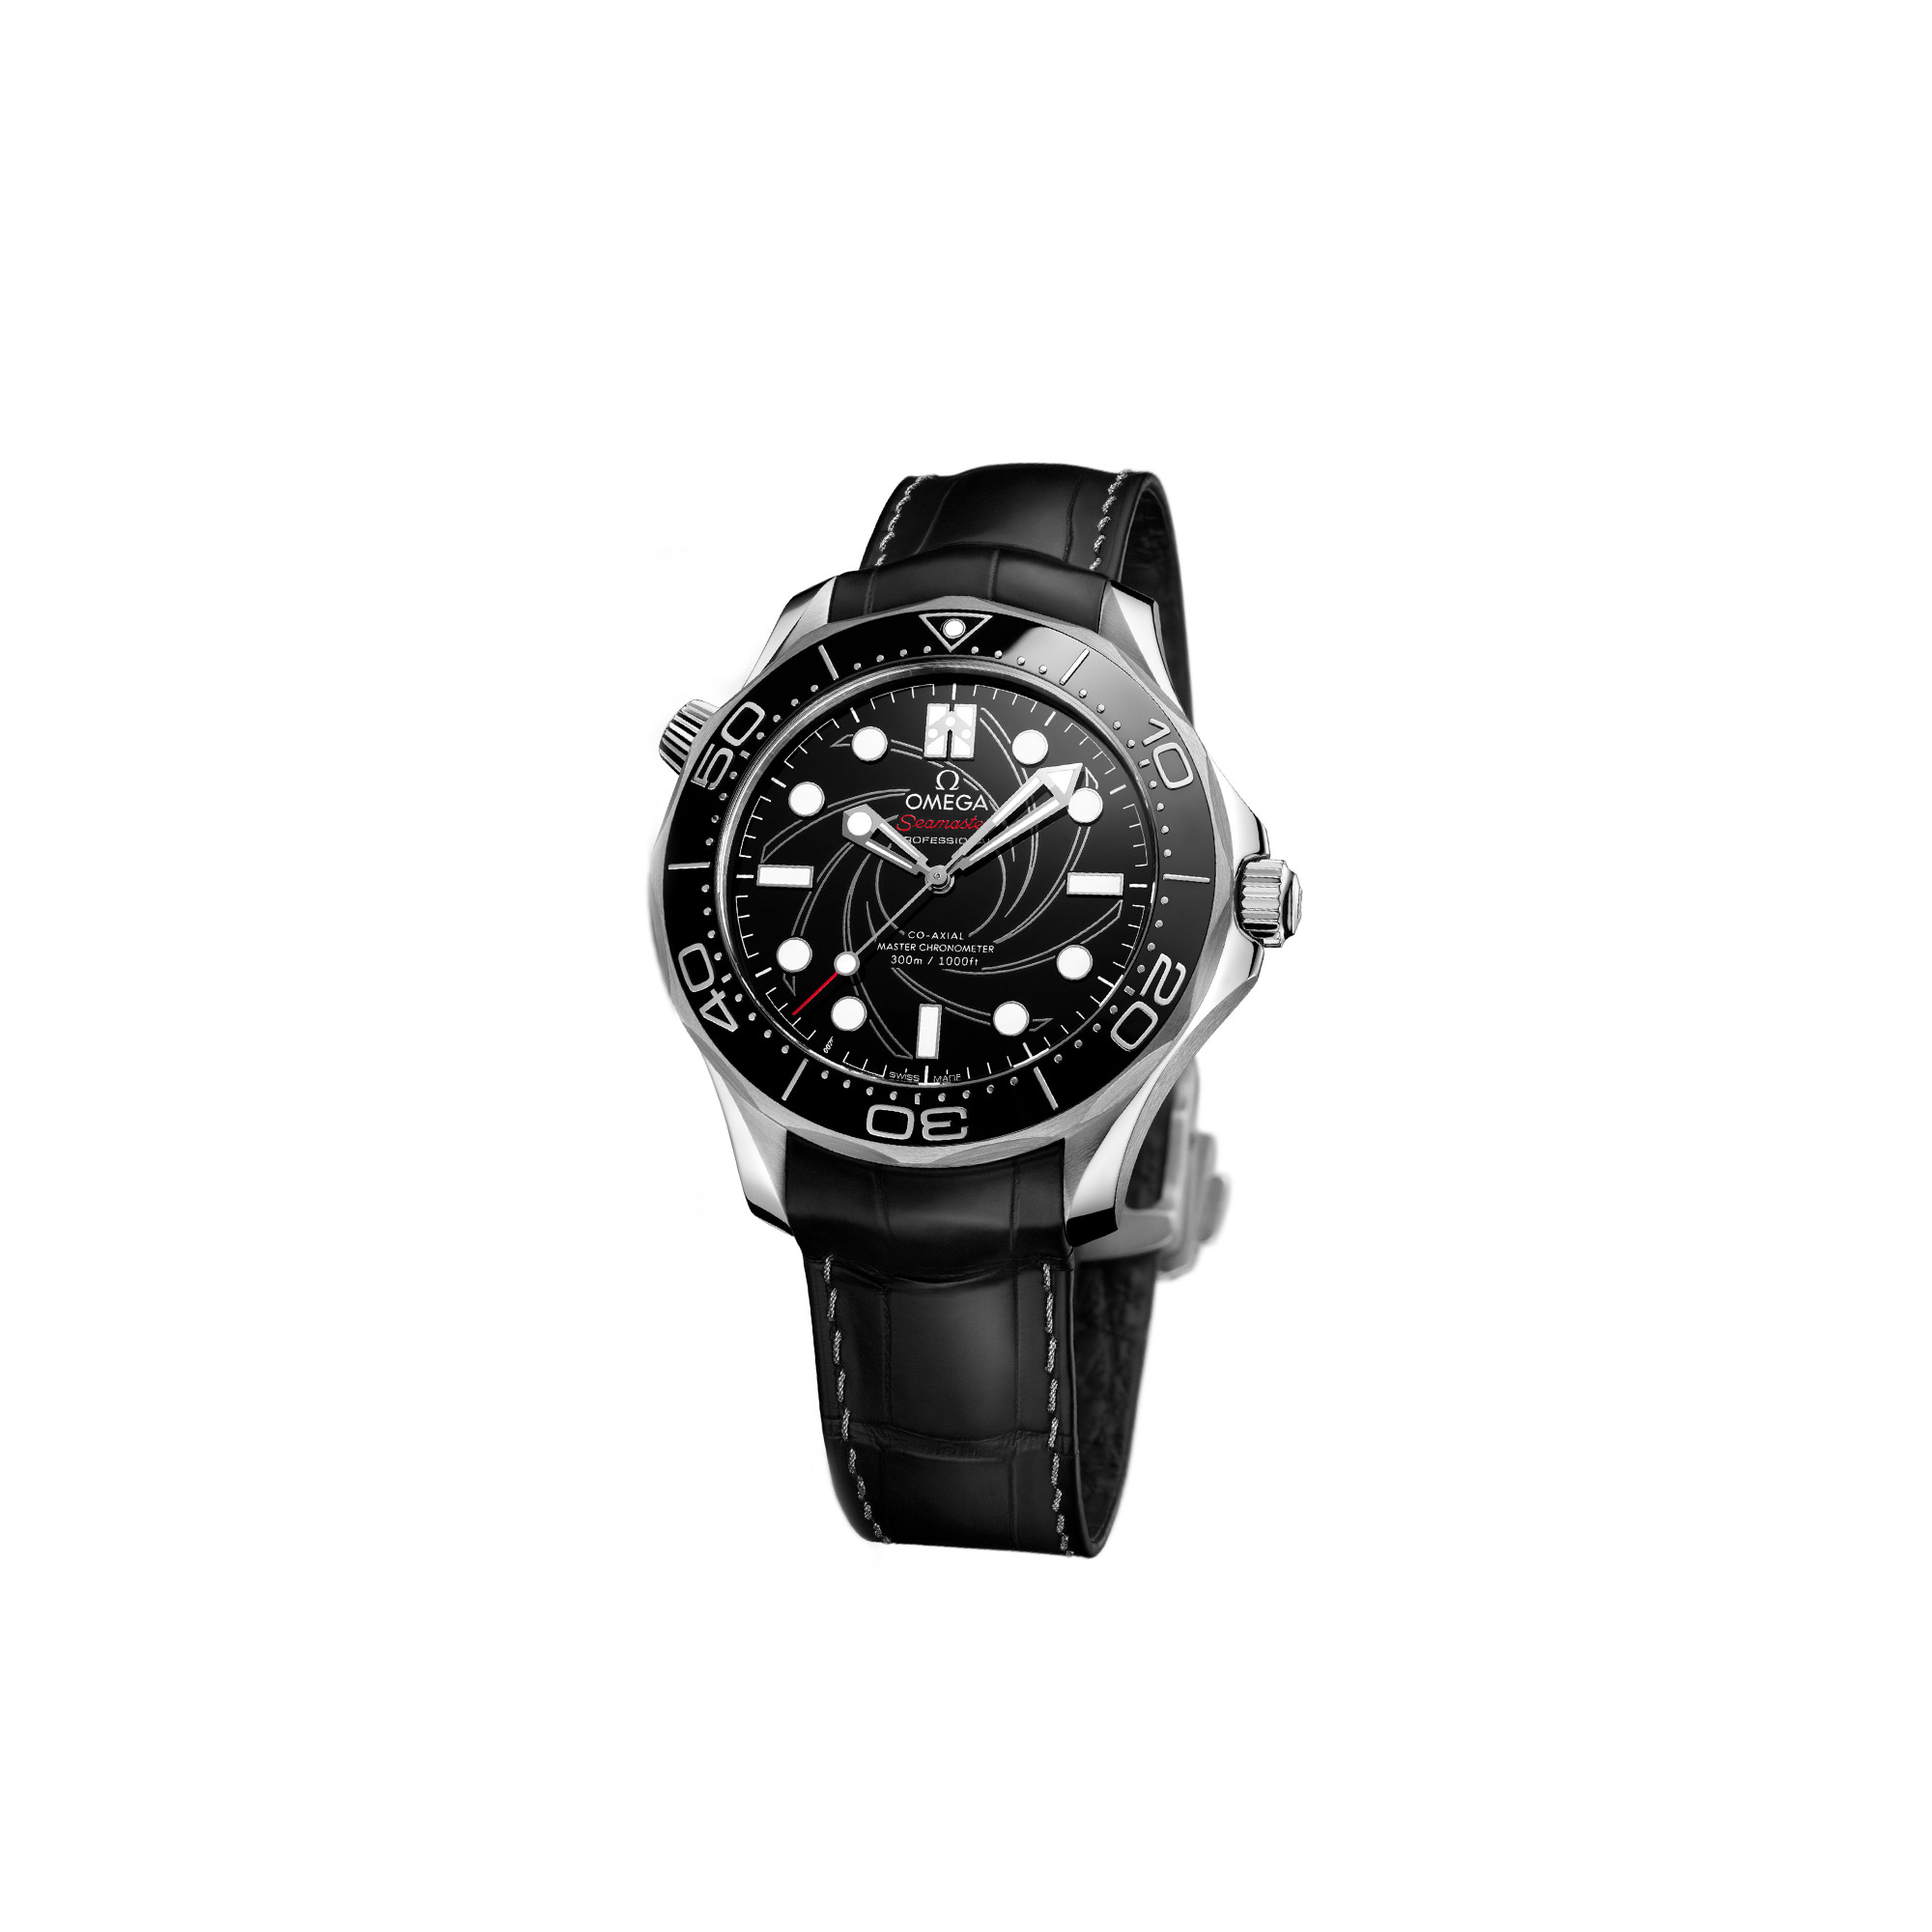 omega seamaster 300m professional diver 007 limited edition